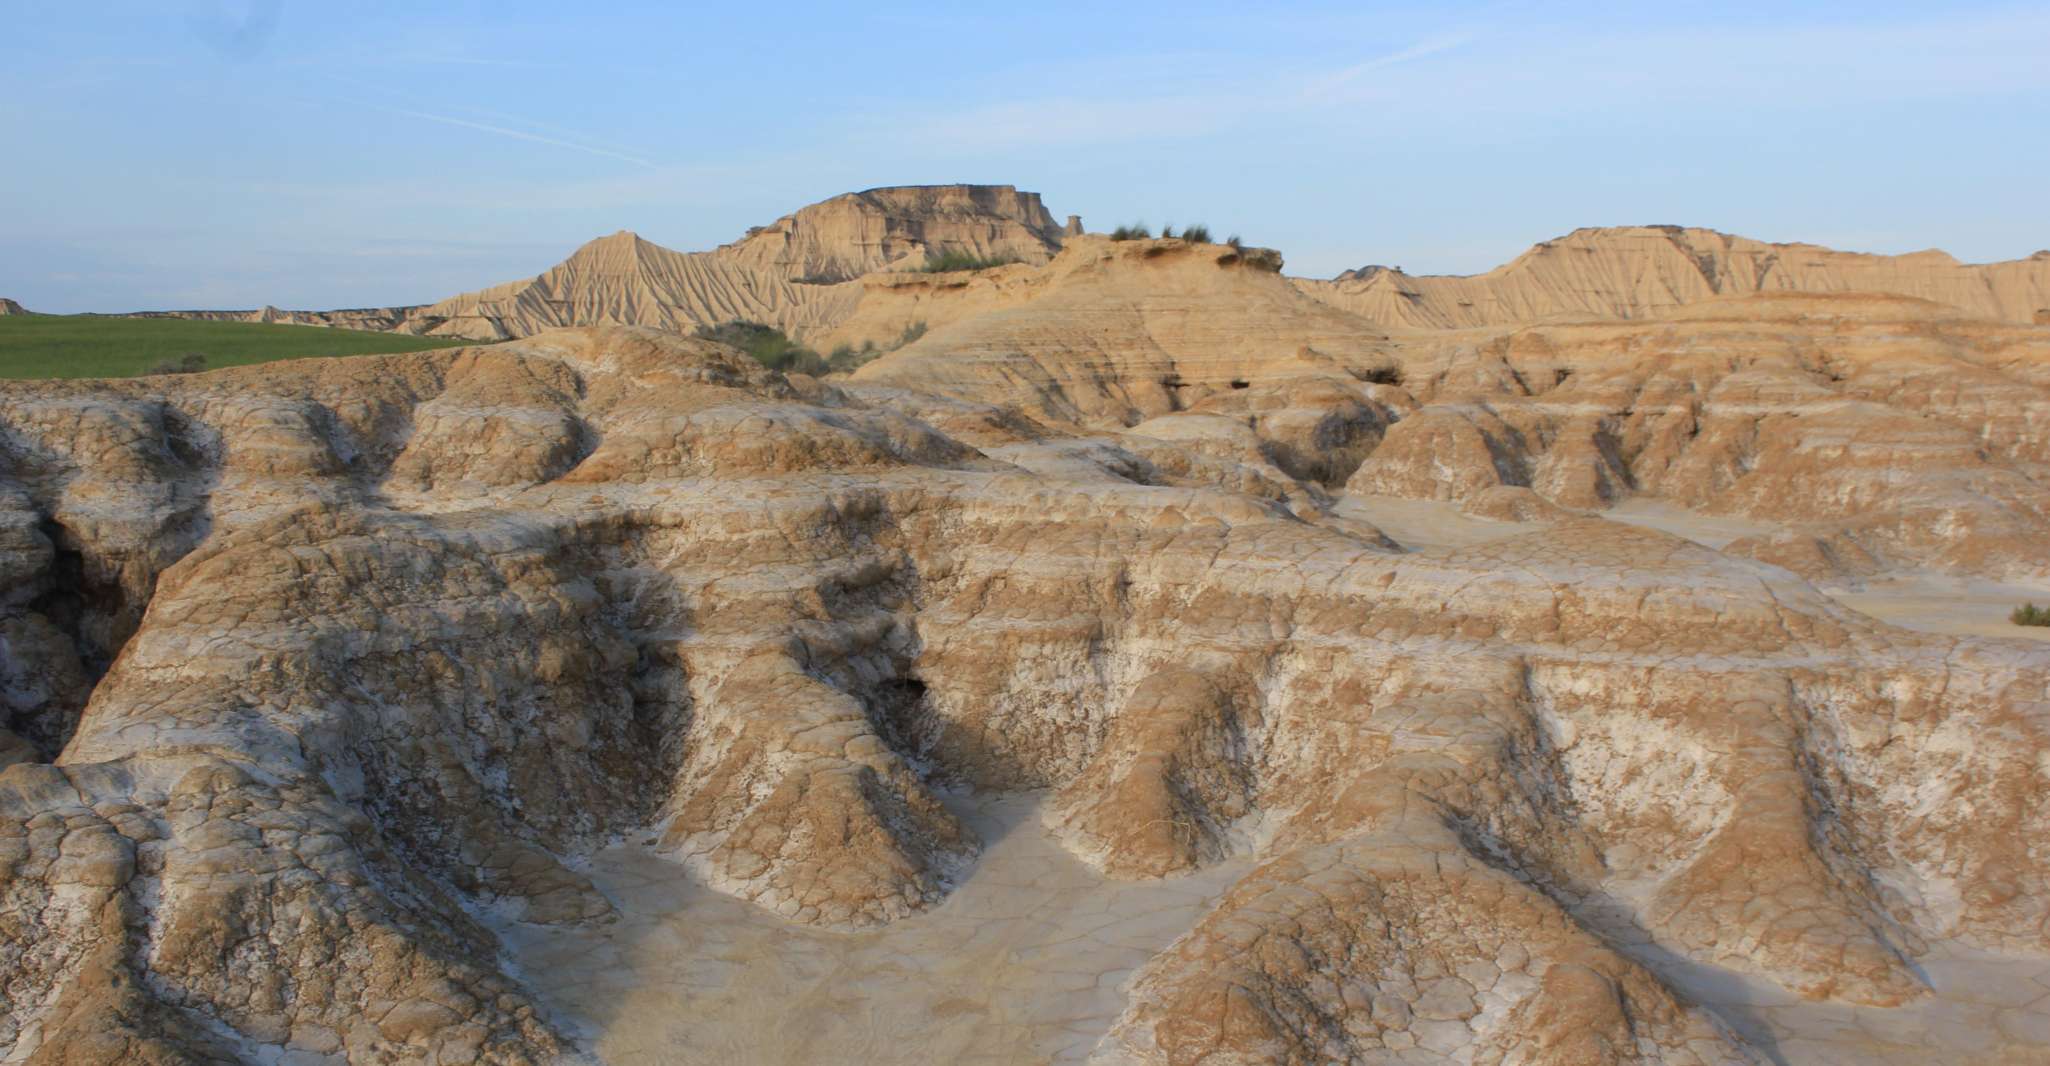 Bardenas Reales, Guided tour in 4x4 private vehicle - Housity